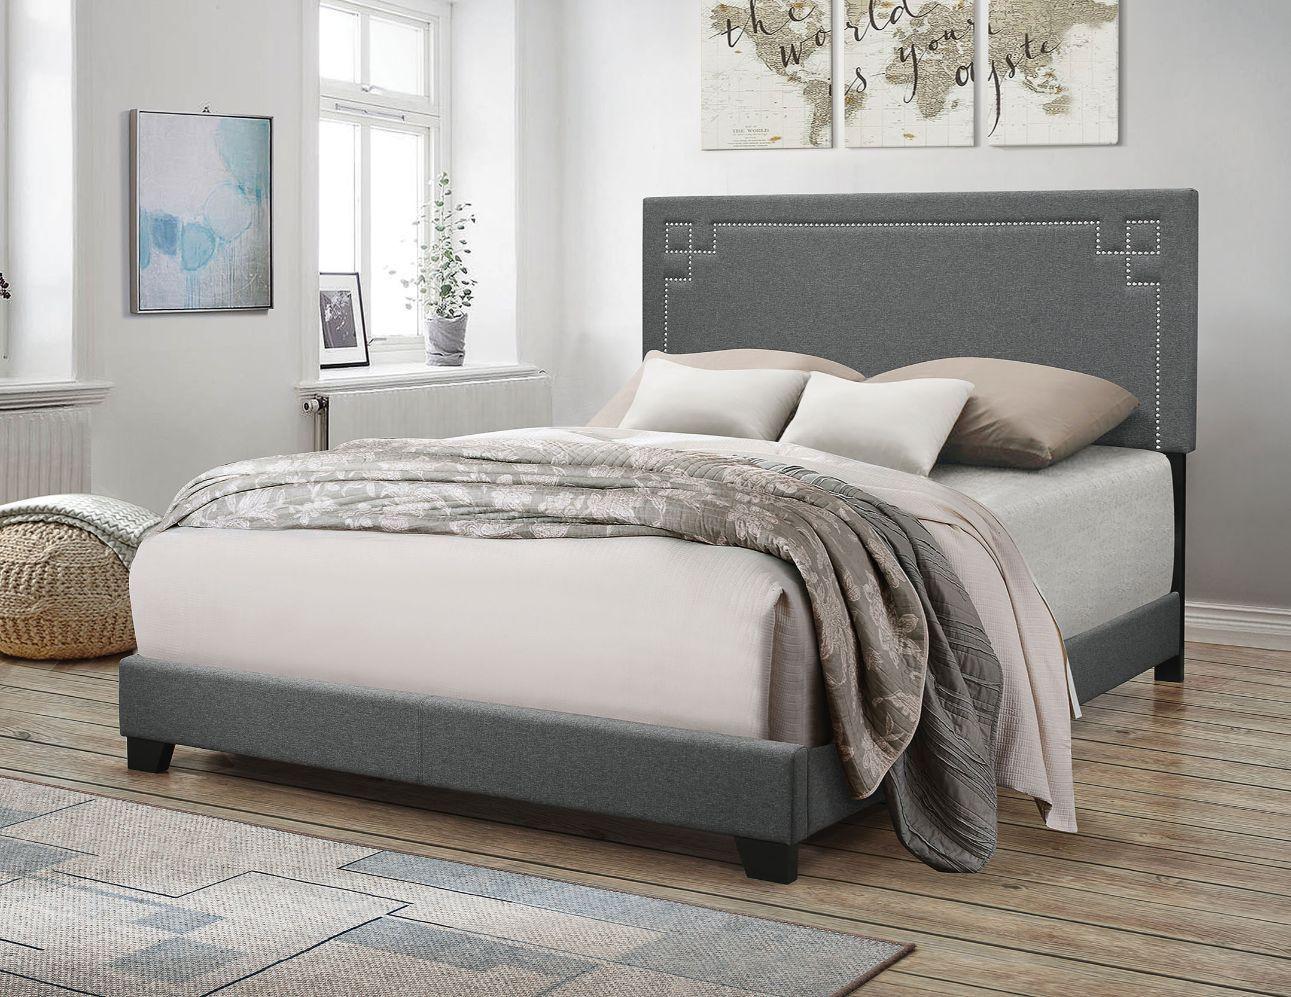 

    
Transitional Gray Fabric Queen Bed by Acme Ishiko II 20910Q
